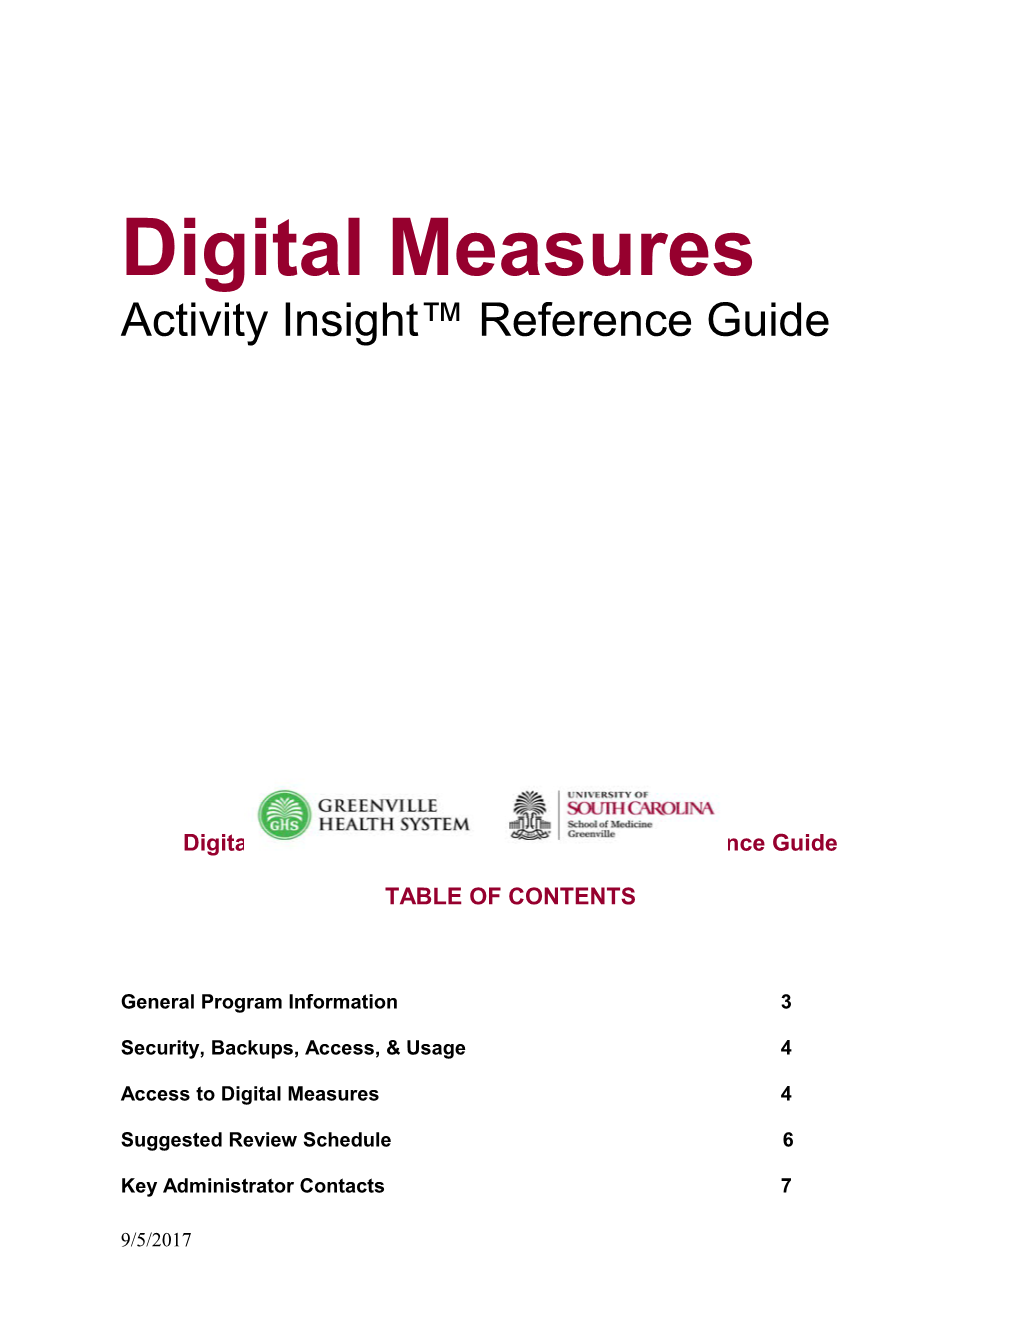 Digital Measures Activityinsight (DMAI) Reference Guide